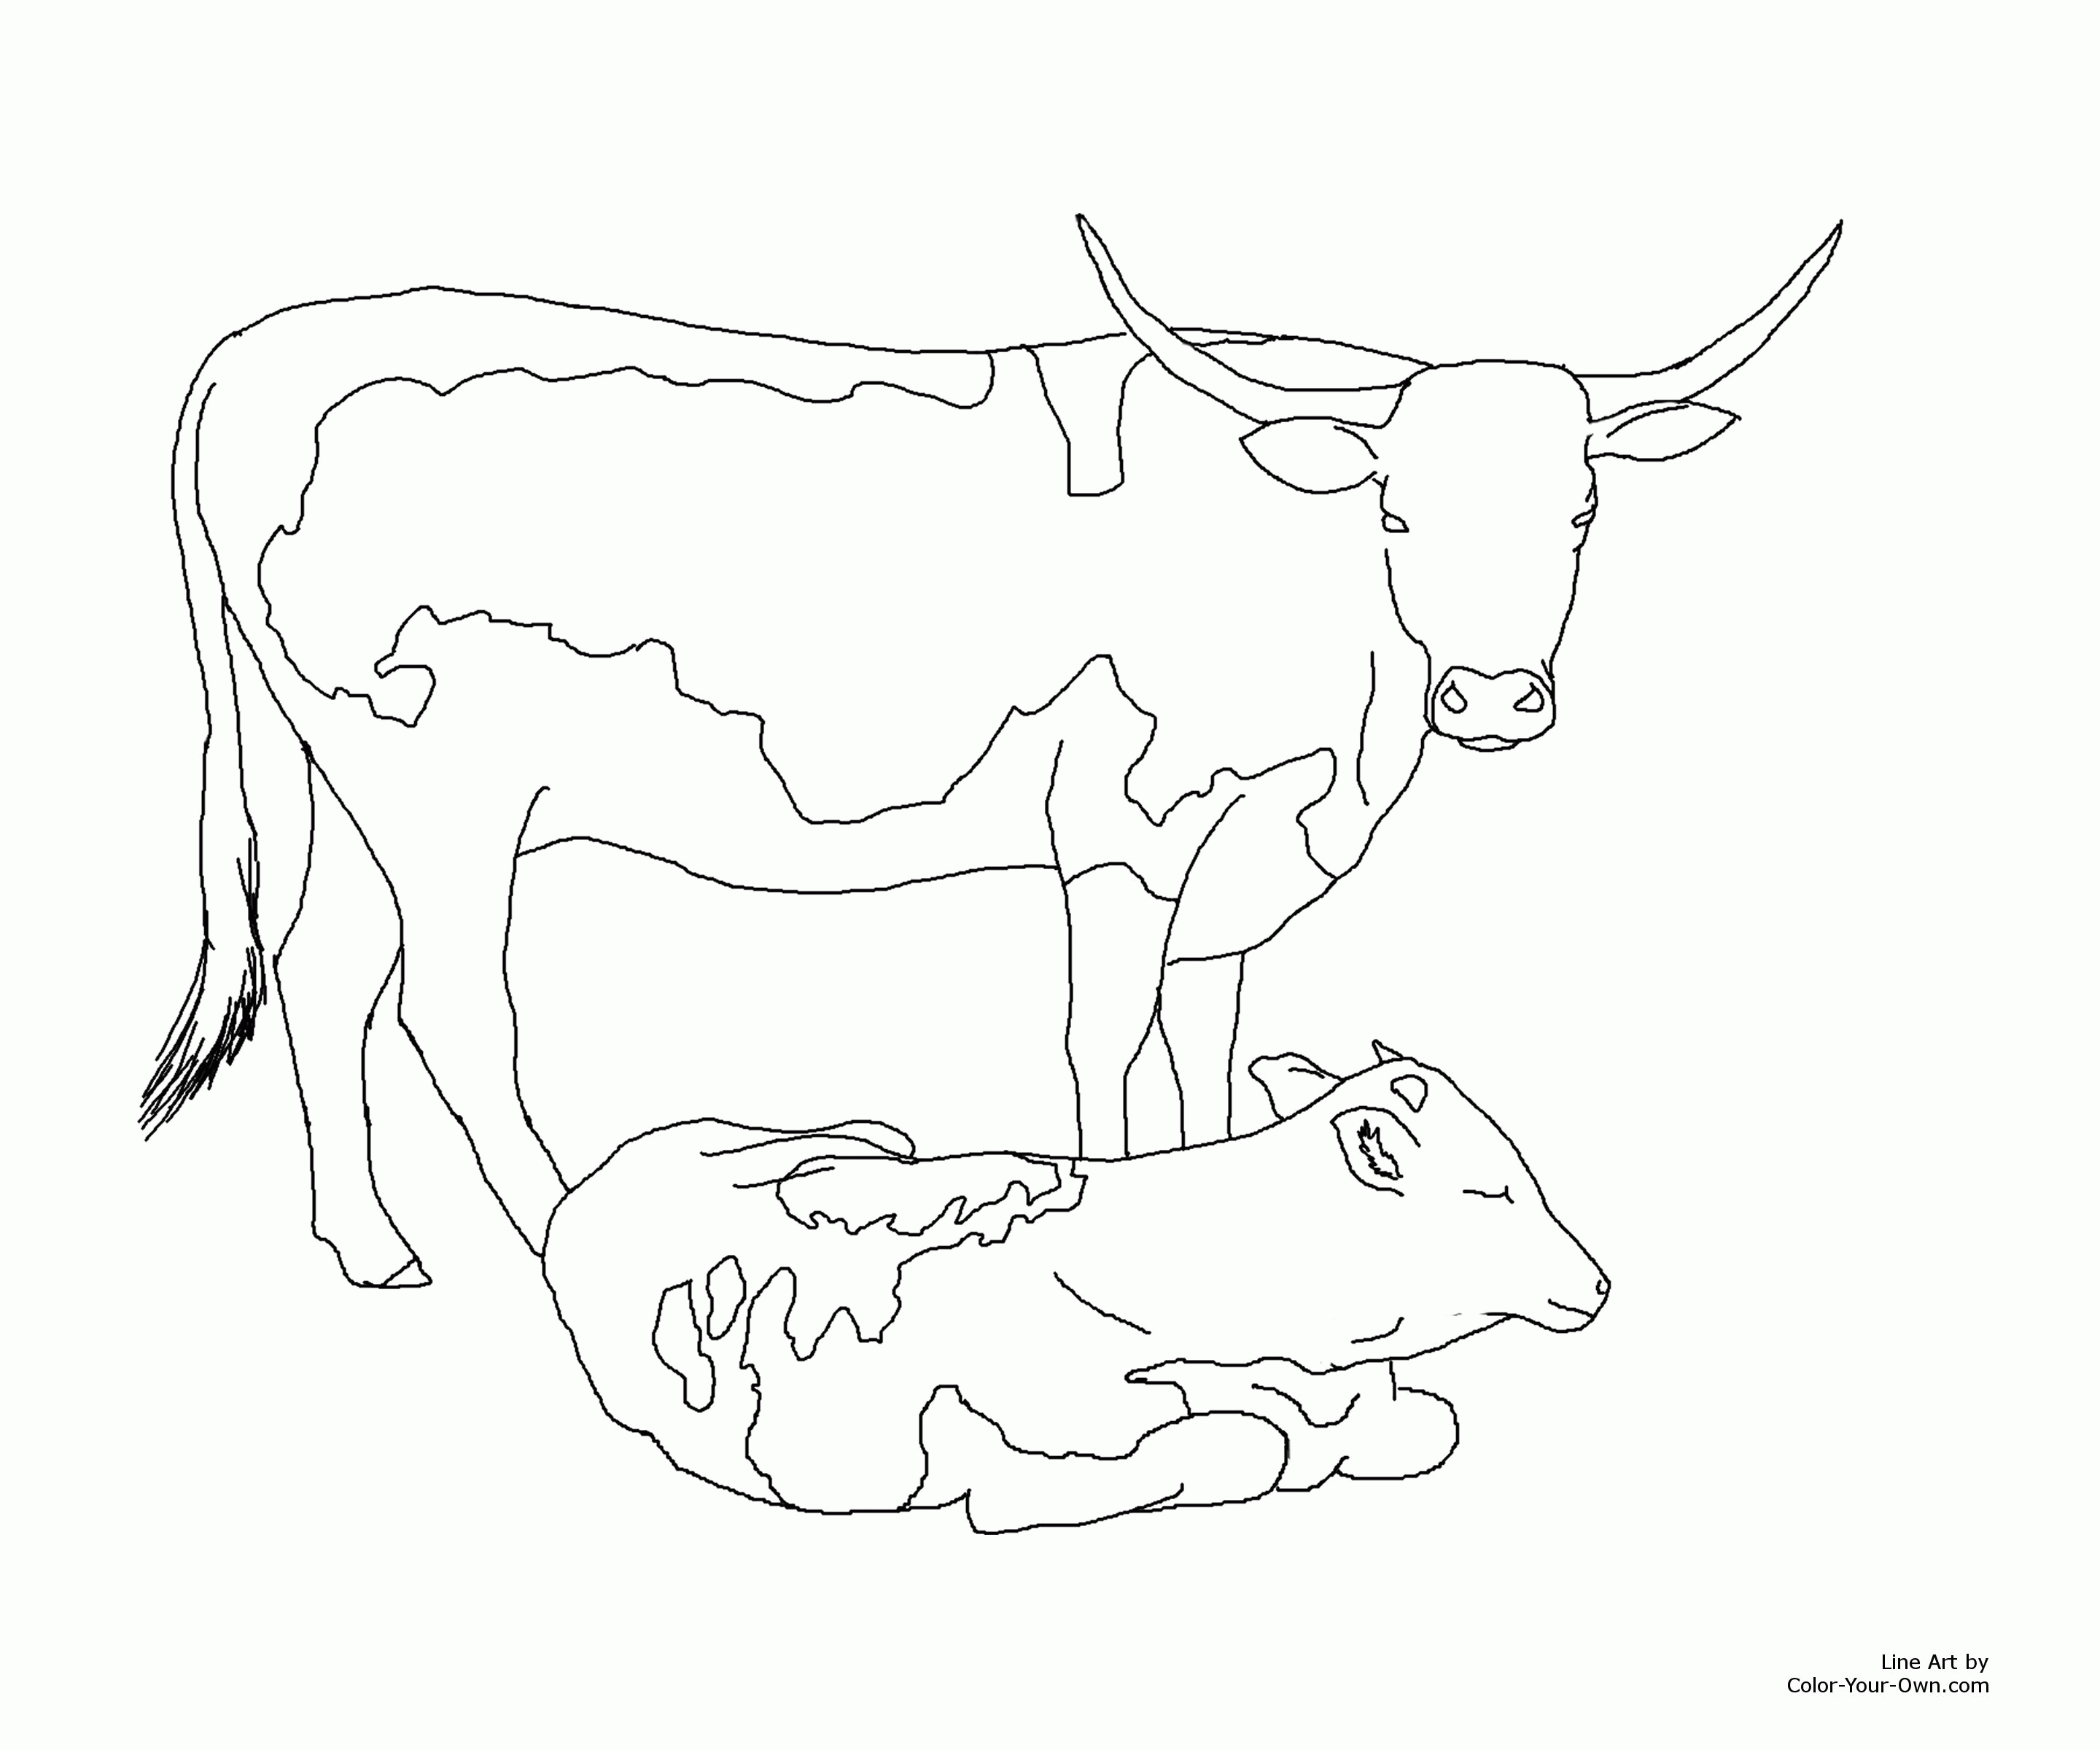 13 Pics of Longhorn Coloring Pages - Longhorn Head Coloring Pages ...